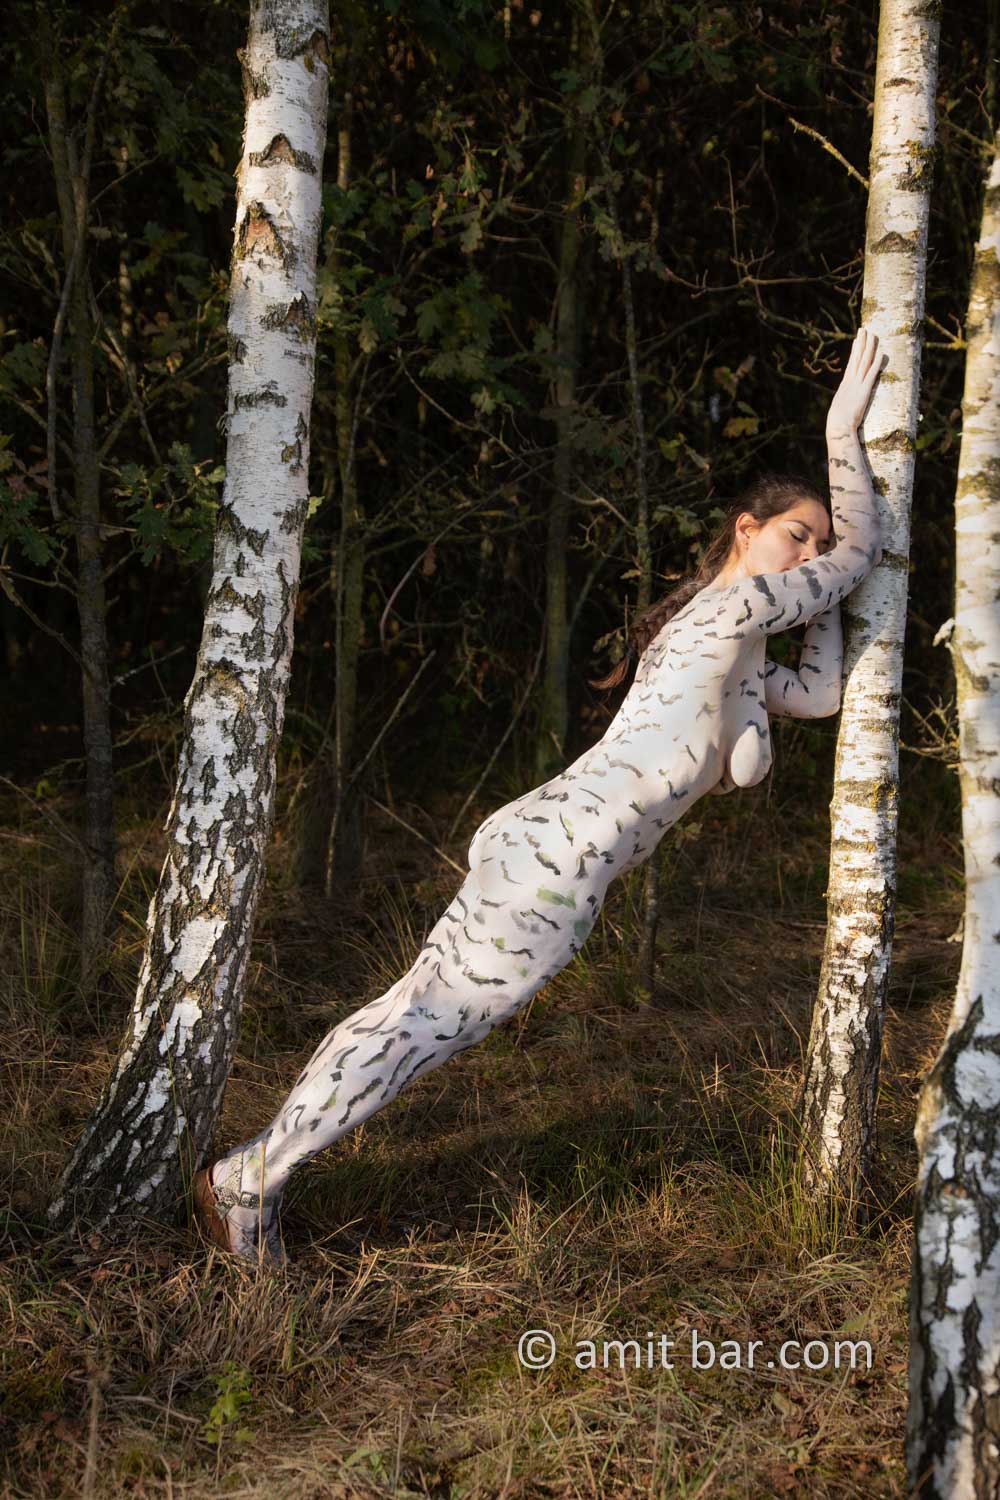 Birches grove III: A body-painting model is strolling among the white trunks of birch trees in De Achterhoek, The Netherlands